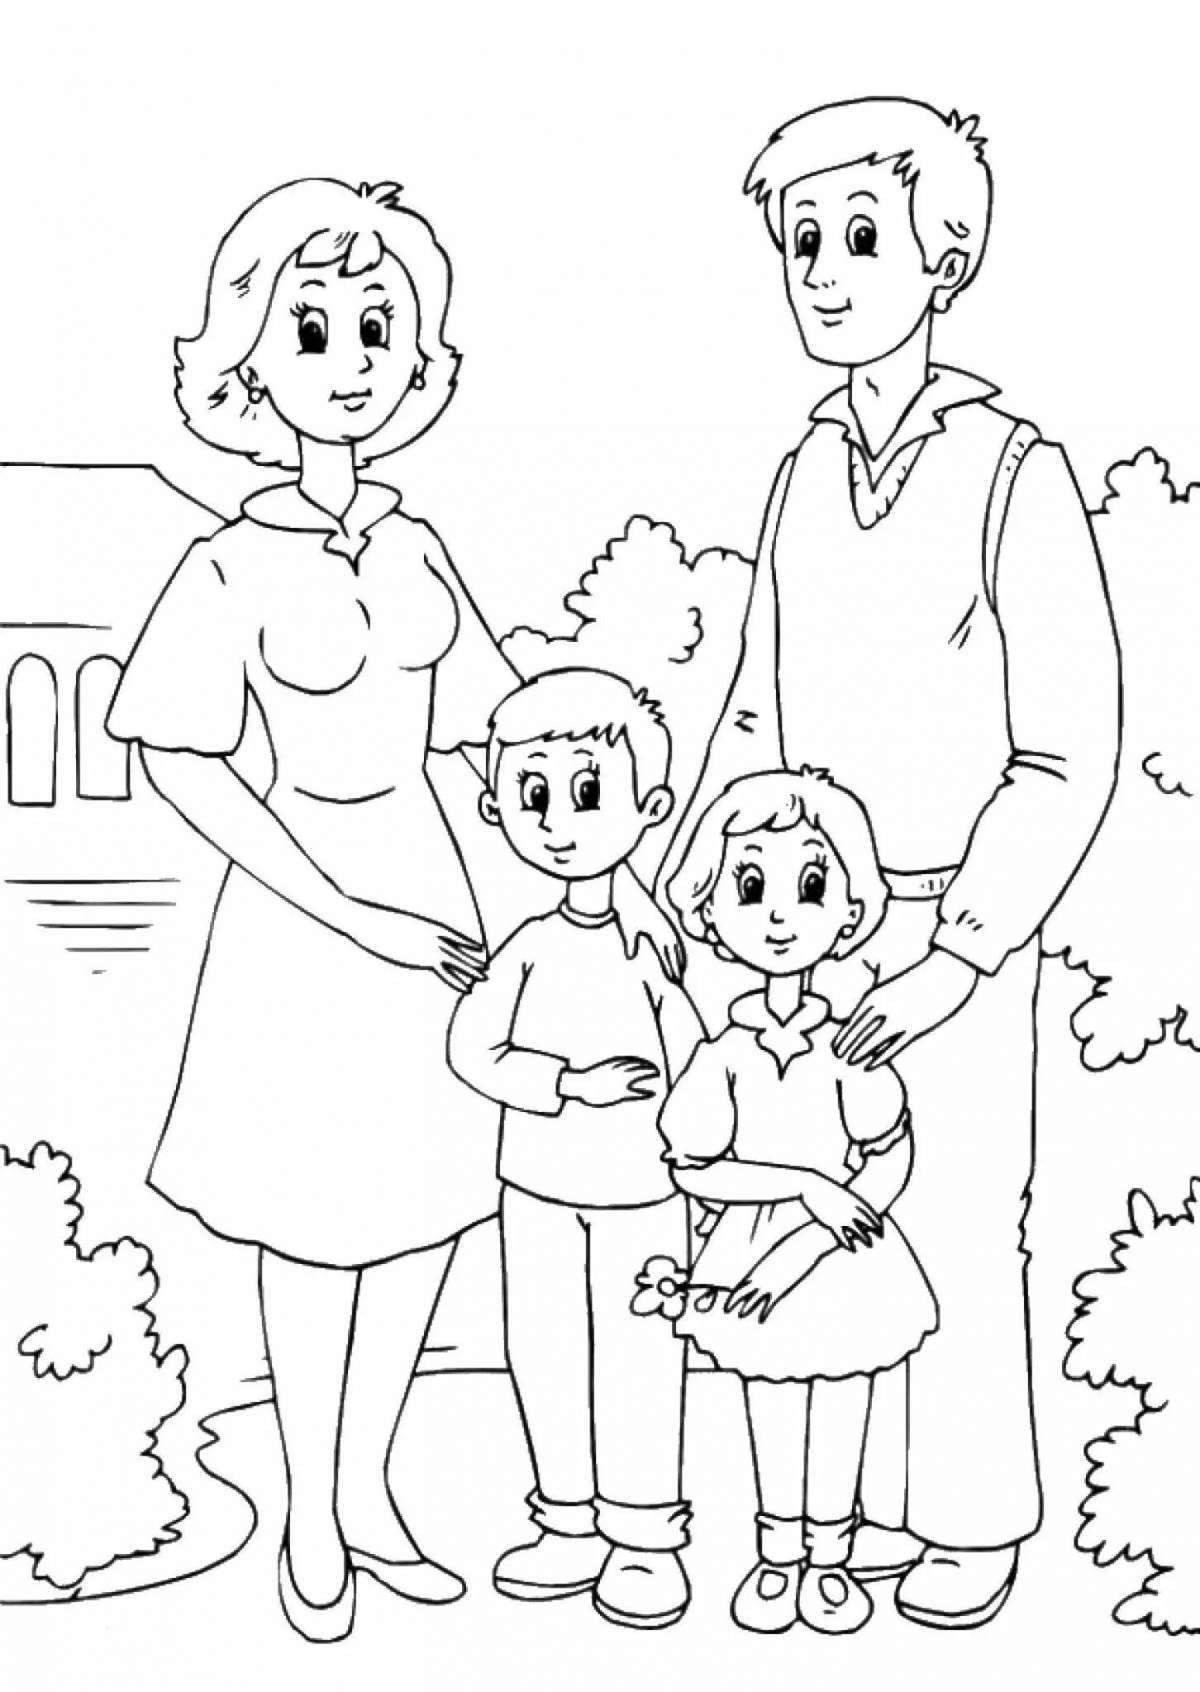 Glorious family coloring book for 7 year olds